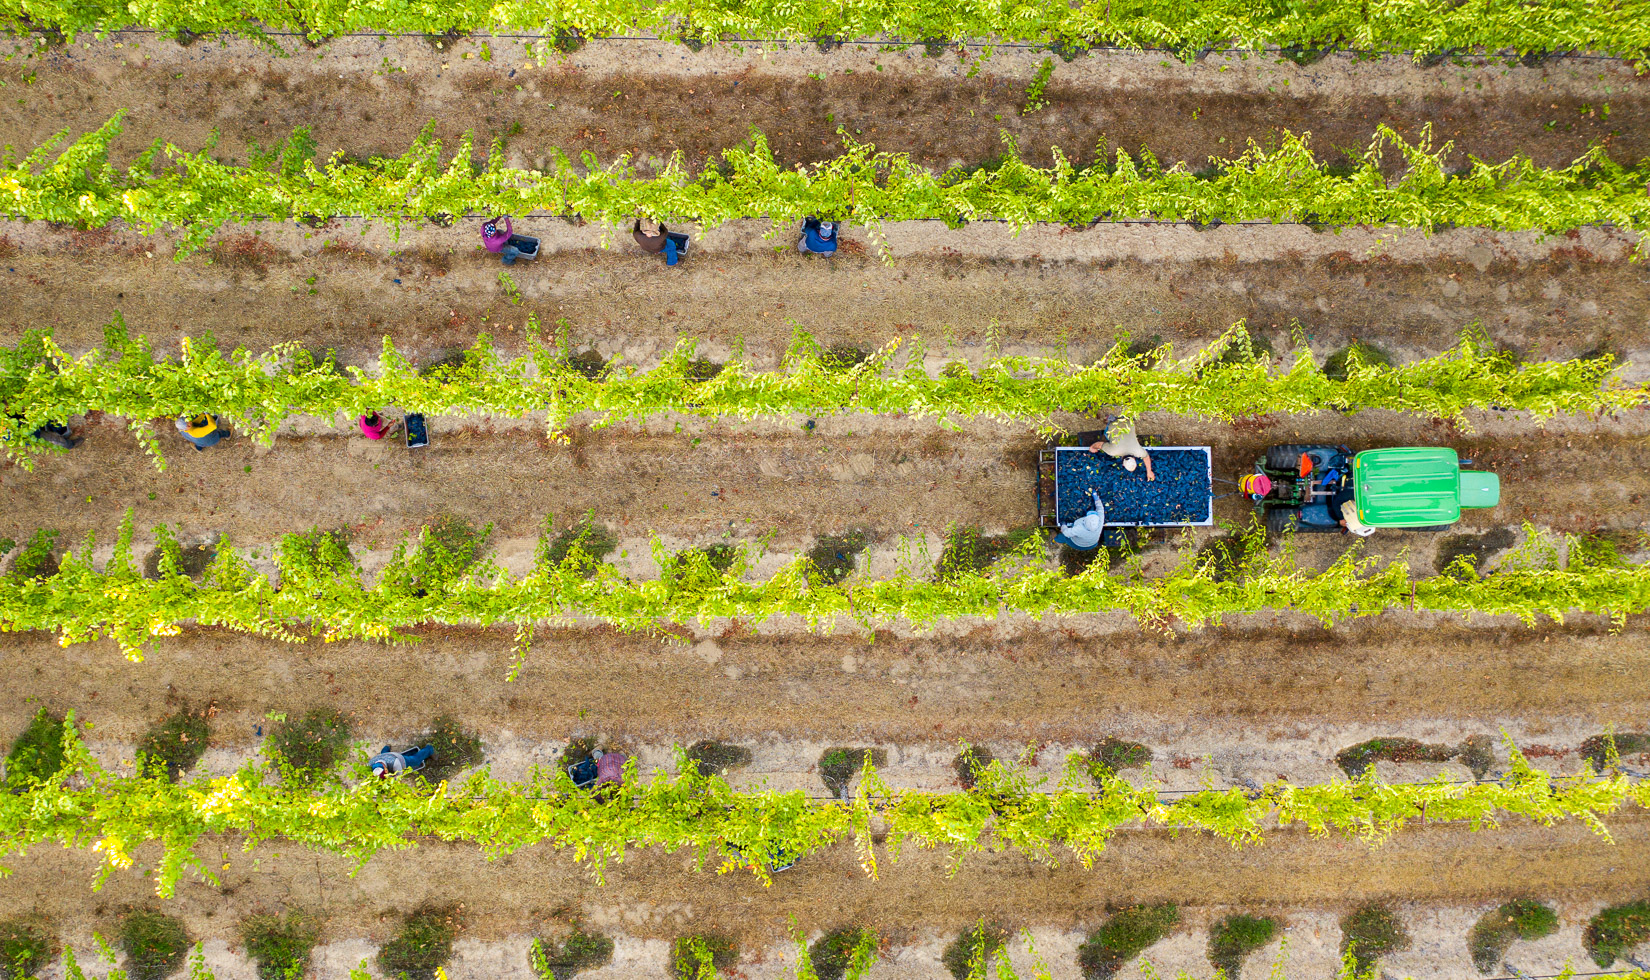 Aerial view of grape harvesters in a vineyard with a tractor pulling a full cart load of purple grapes.